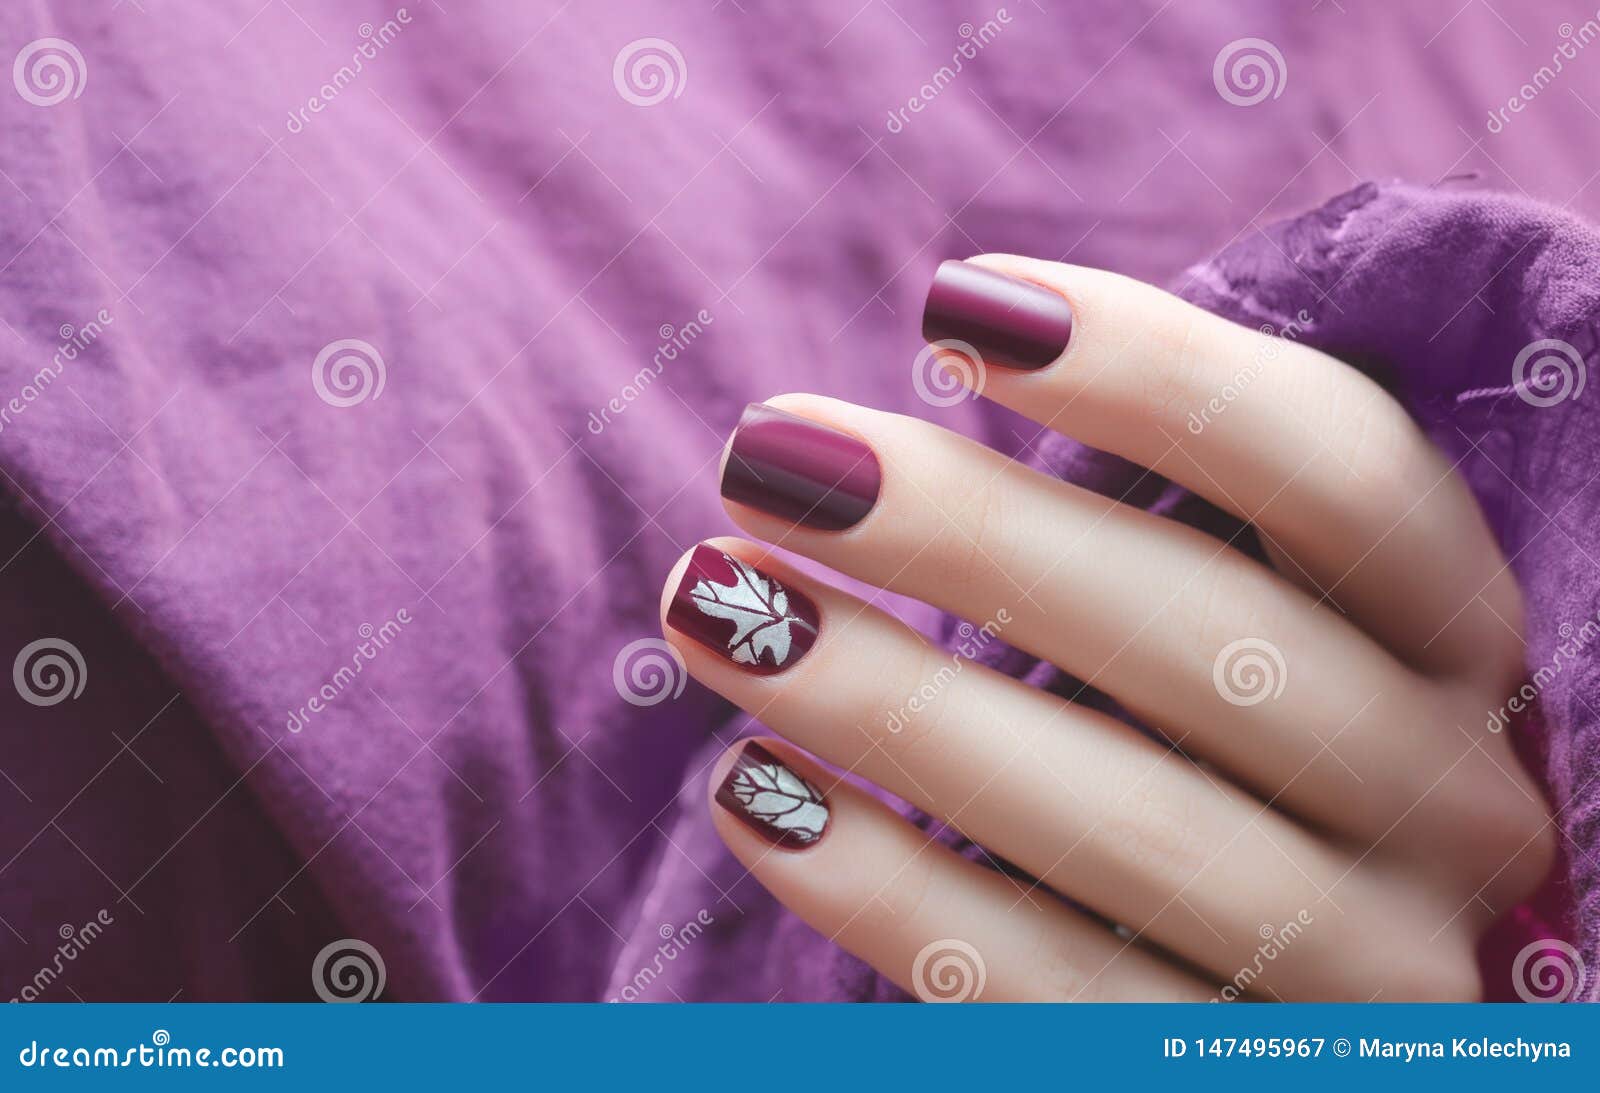 2. Purple and Gold Marble Short Nail Design - wide 3